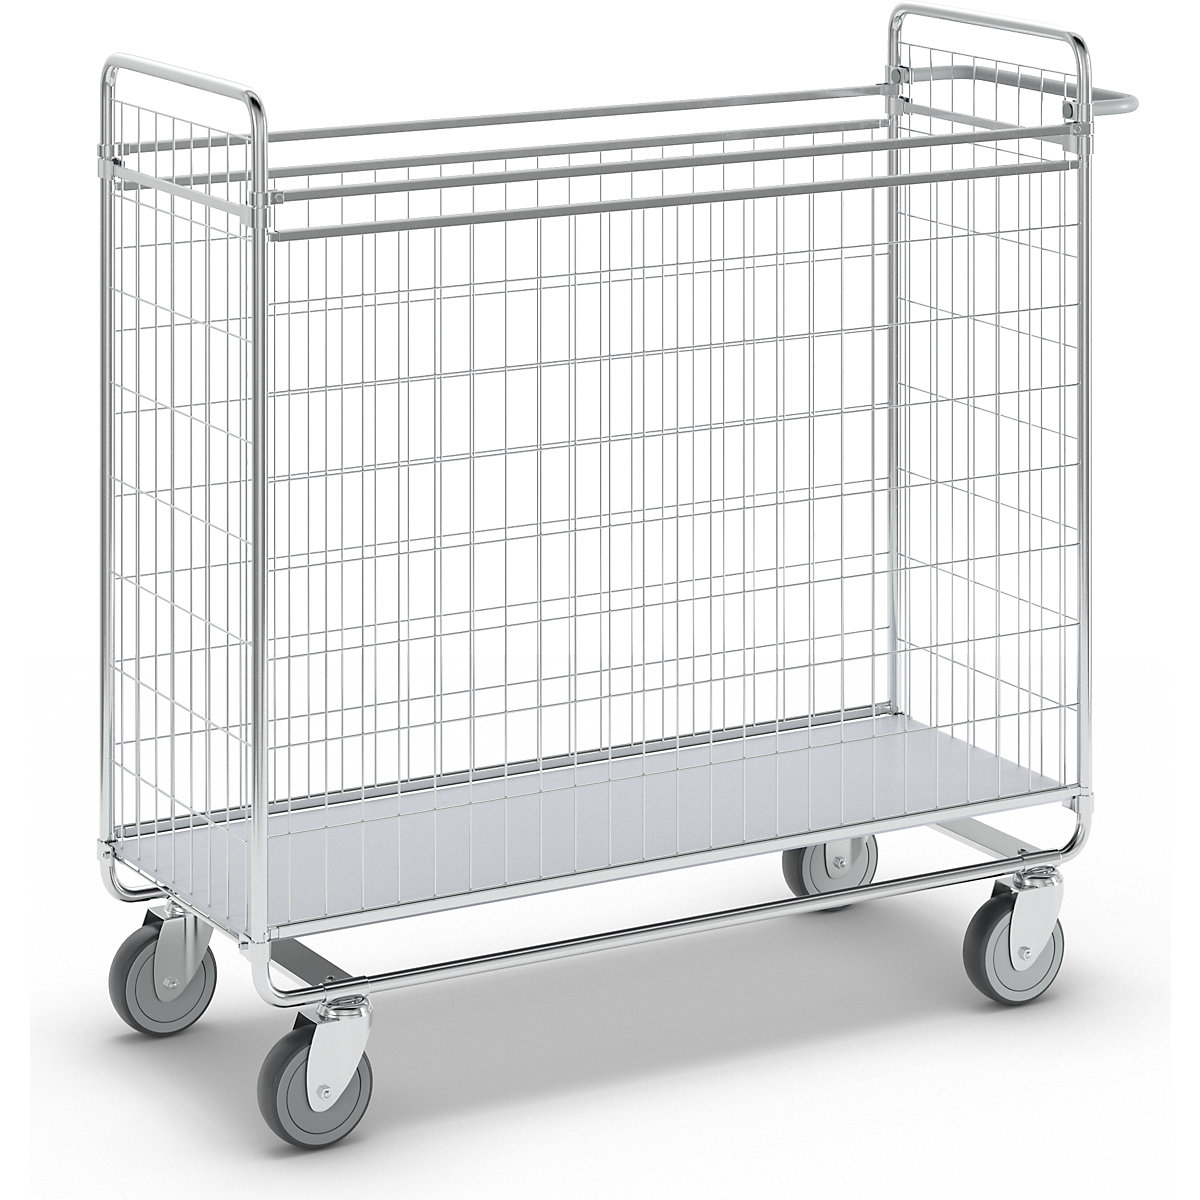 SERIES 100 four-sided trolley – HelgeNyberg, max. load 100 kg, LxWxH 1180 x 460 x 1120 mm-1